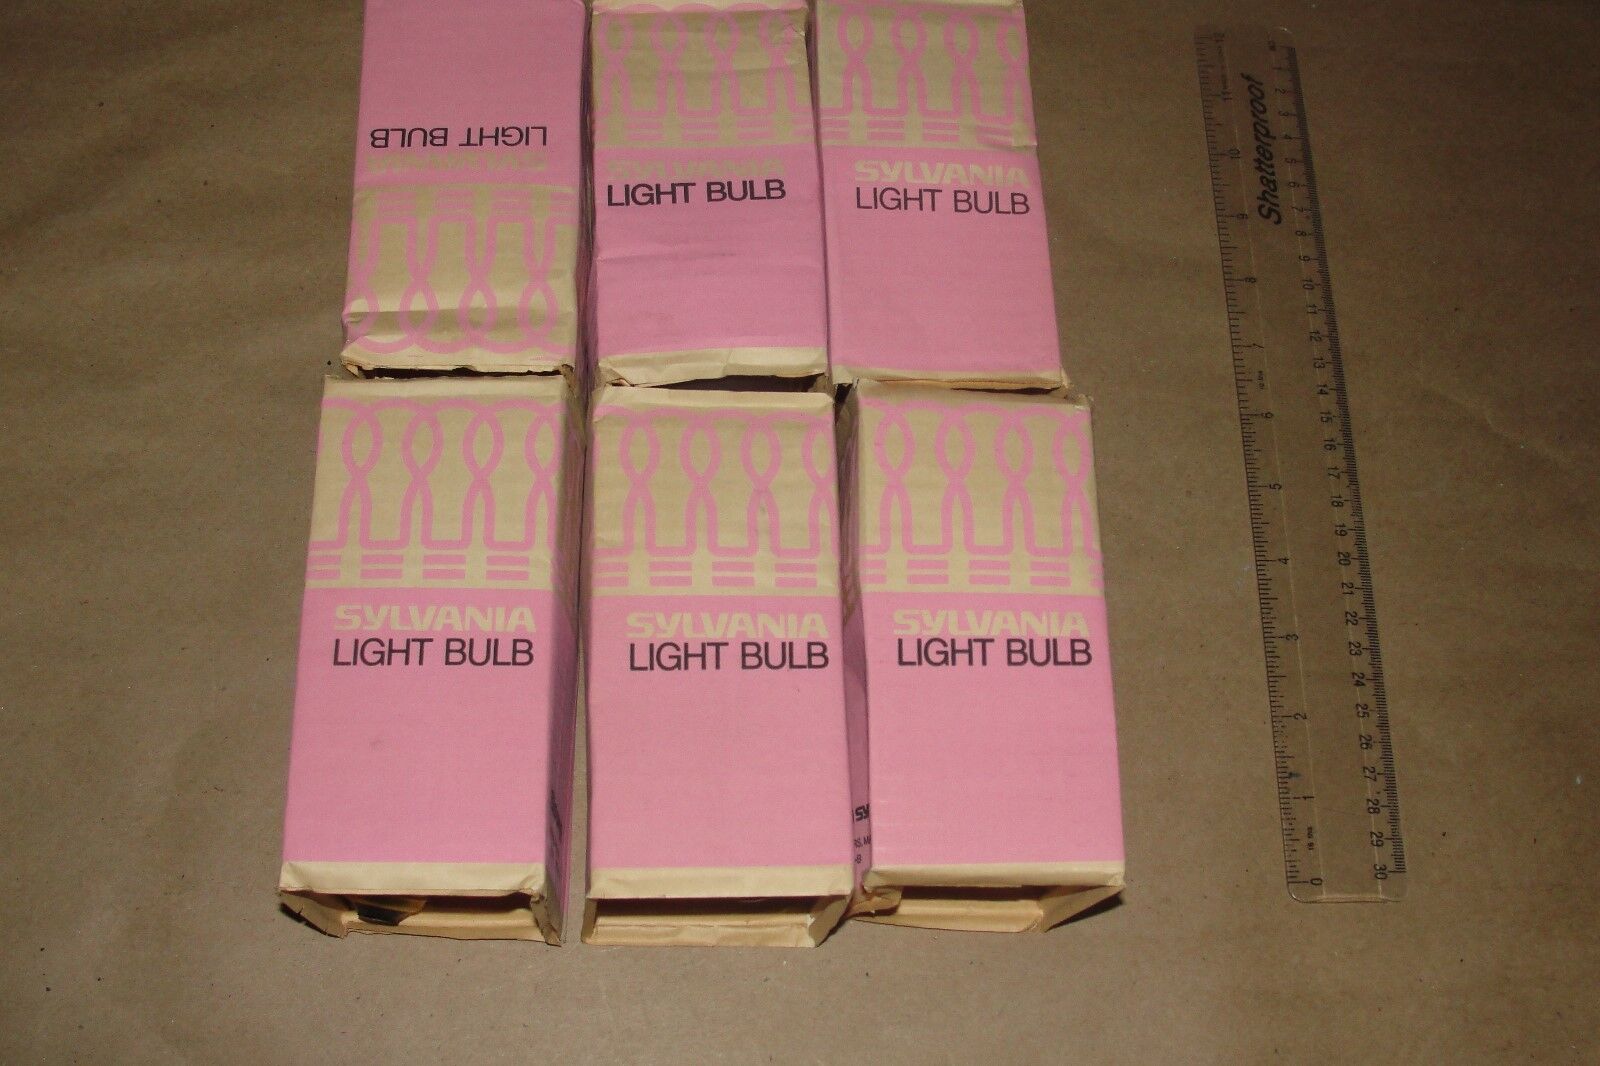 Vintage Lot of 6 Sylvania 75W Light Bulb rough service (MADE IN USA)